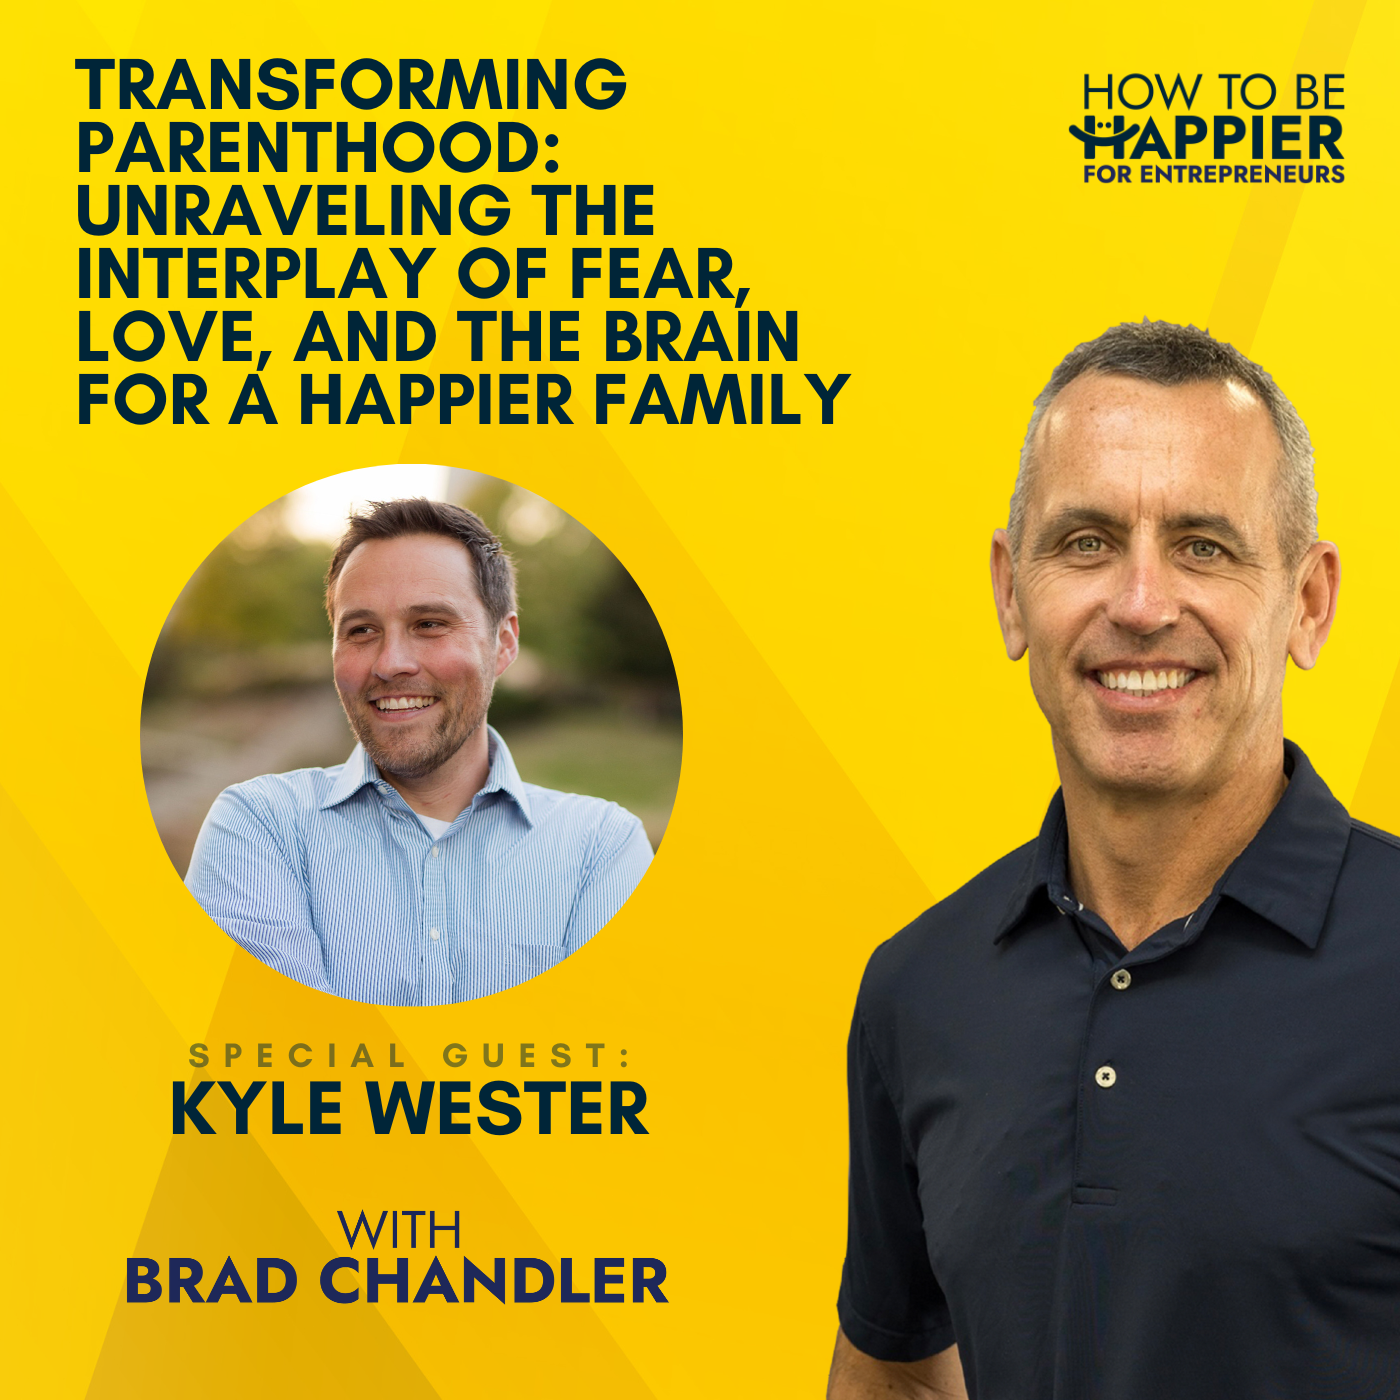 Ep60: Transforming Parenthood: Unraveling the Interplay of Fear, Love, and the Brain for a Happier Family with Kyle Wester